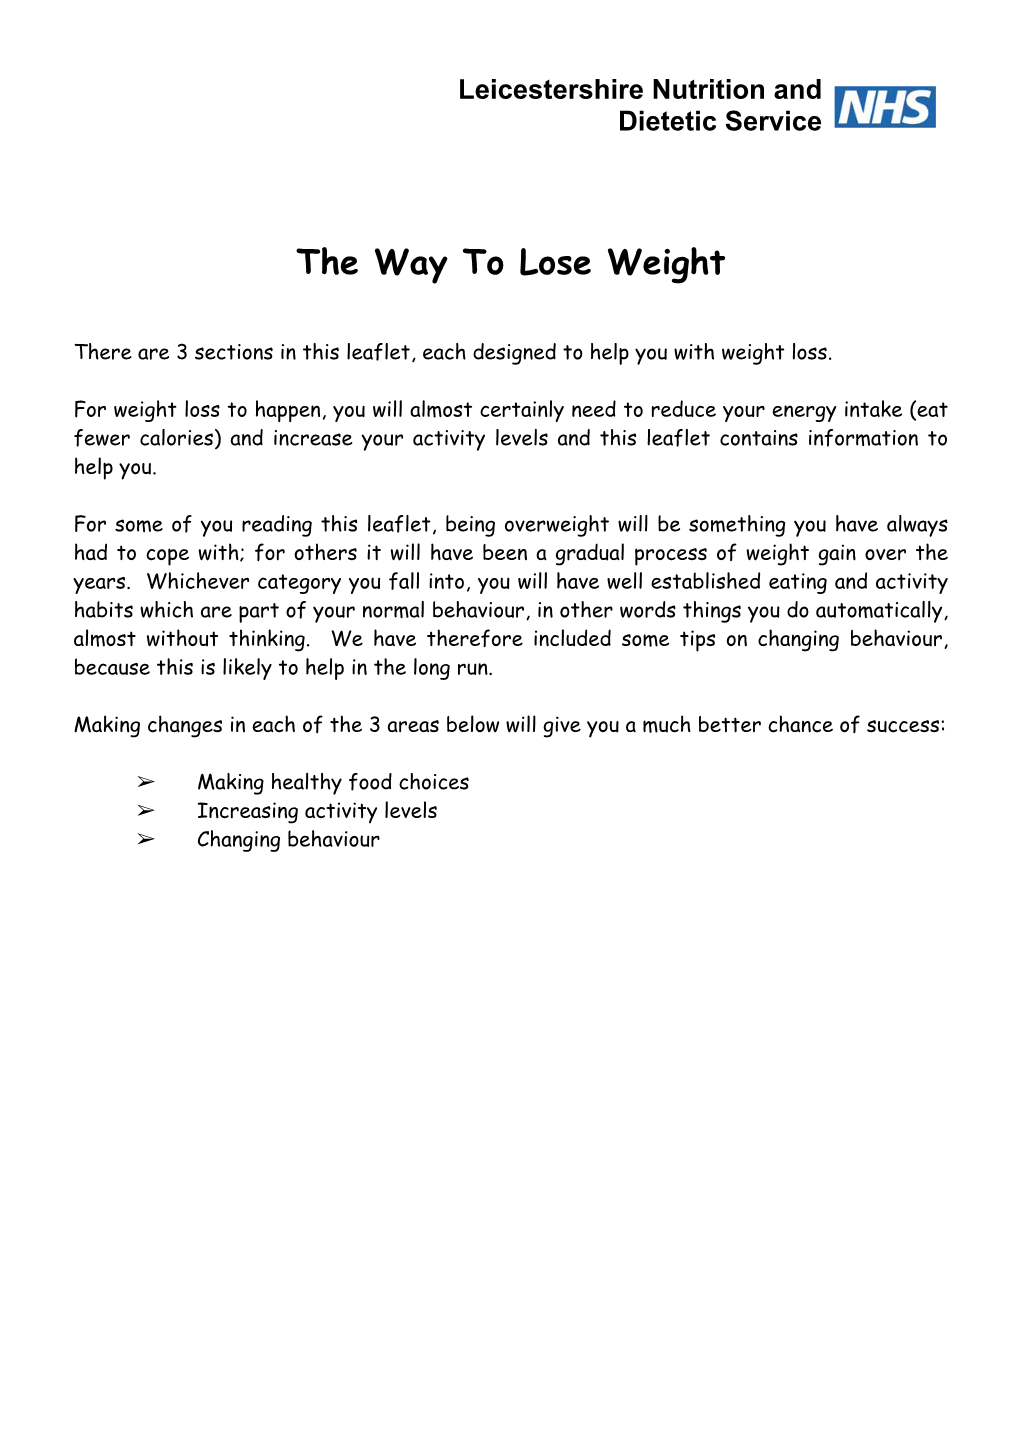 The Way to Lose Weight